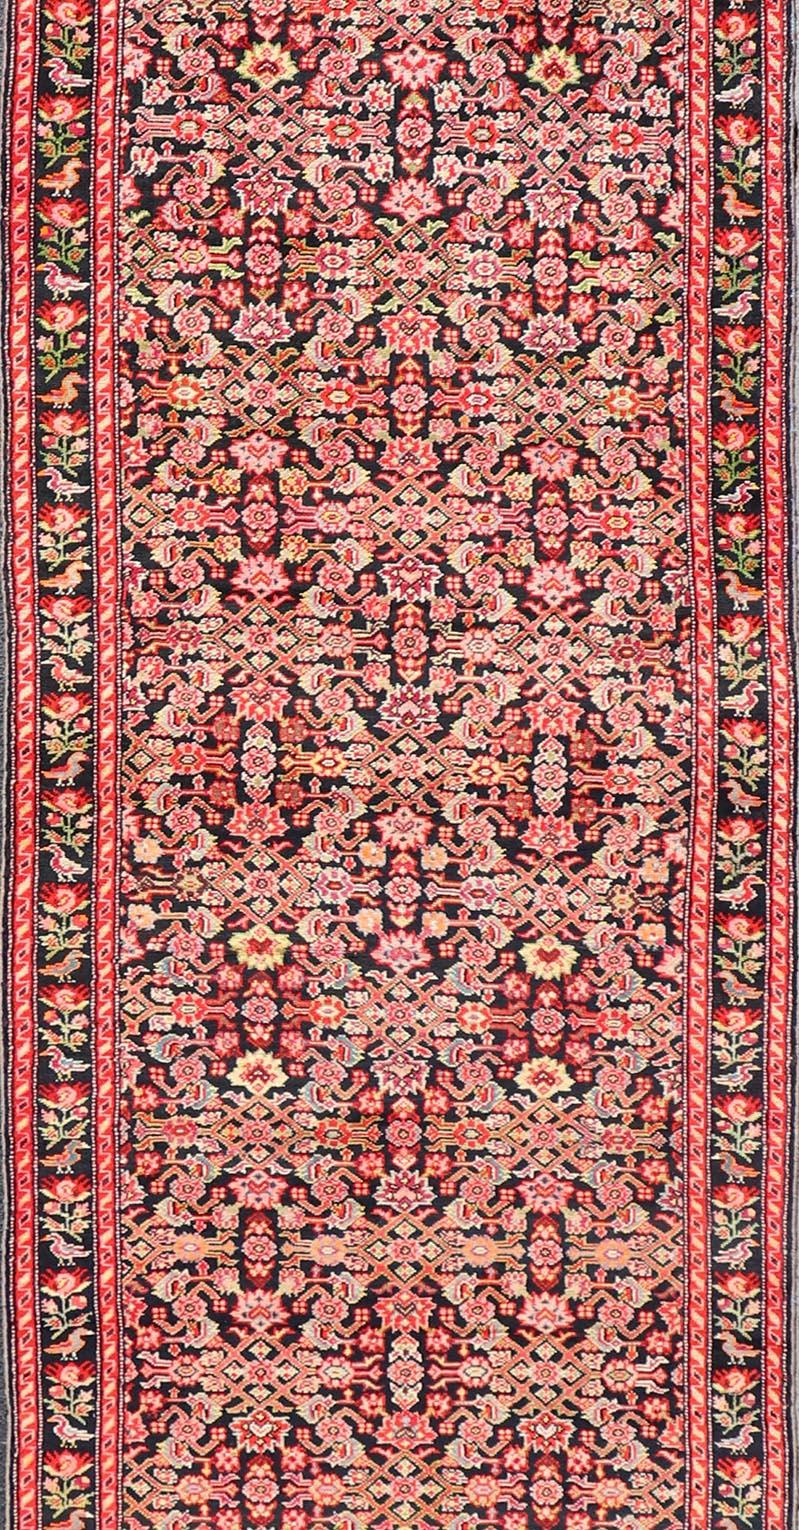 Wool Colorful Jewel-Toned Antique Caucasian Karabagh Runner with All-Over Design For Sale